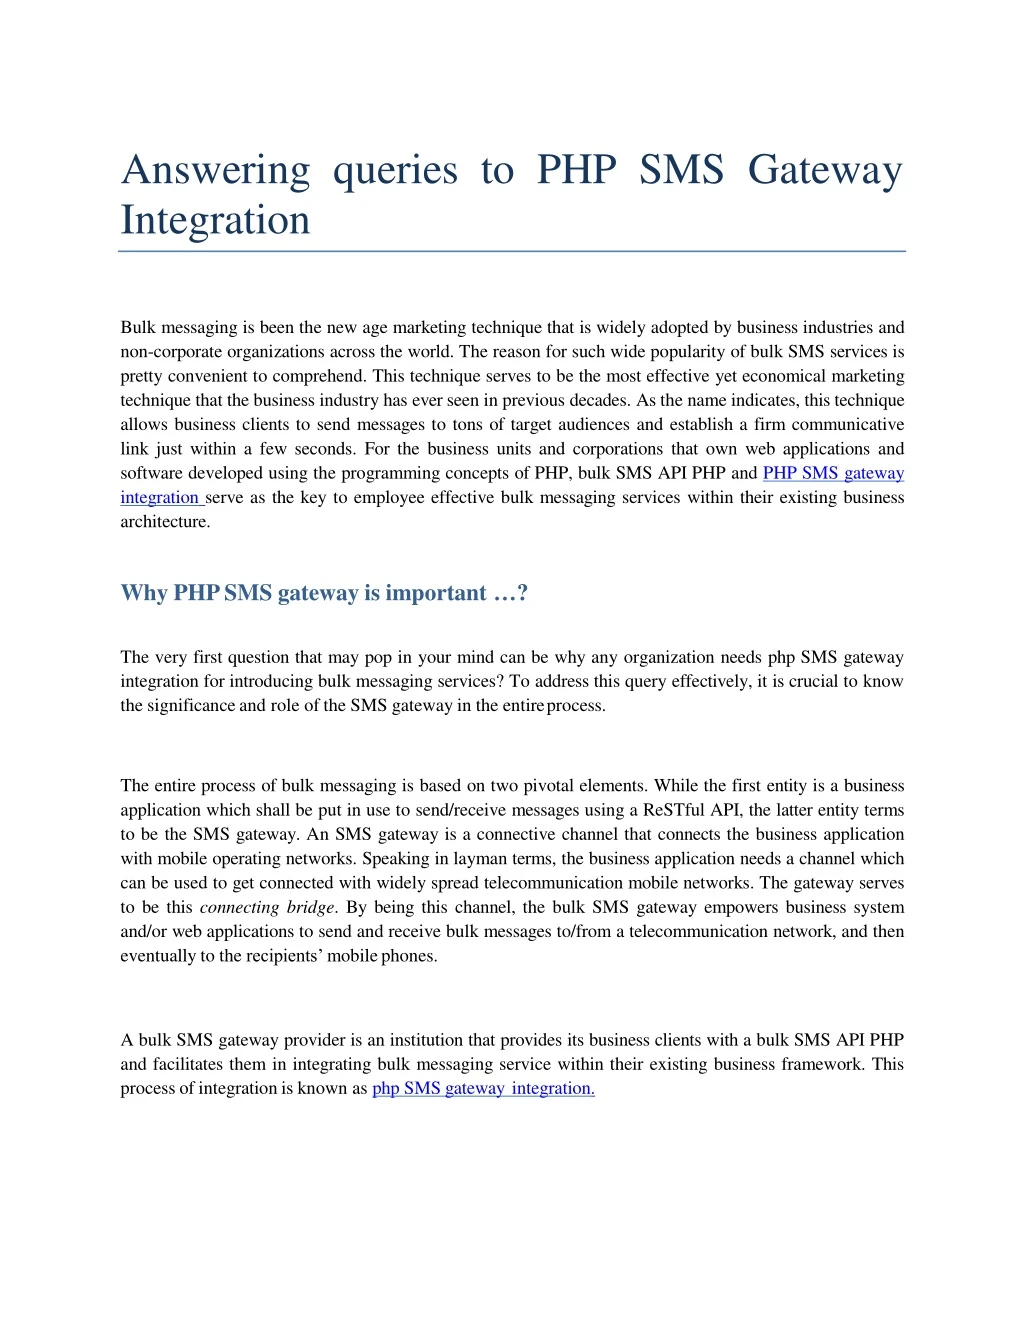 answering queries to php sms gatew a y integration